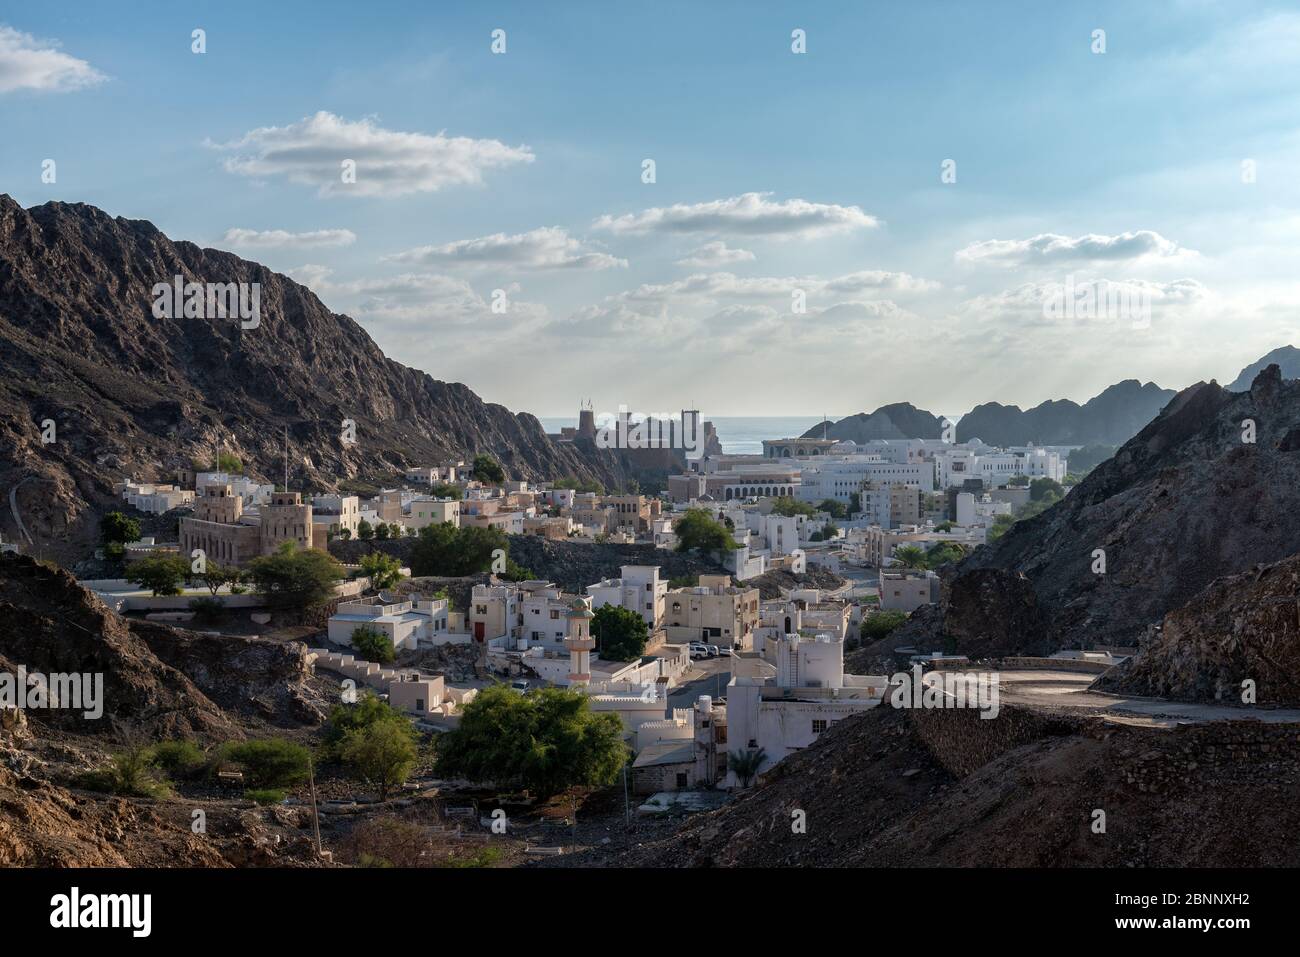 Old town, palace district, cemetery, mountains, rocks, street, fort, clouds, blue sky, morning mood, city gate Stock Photo